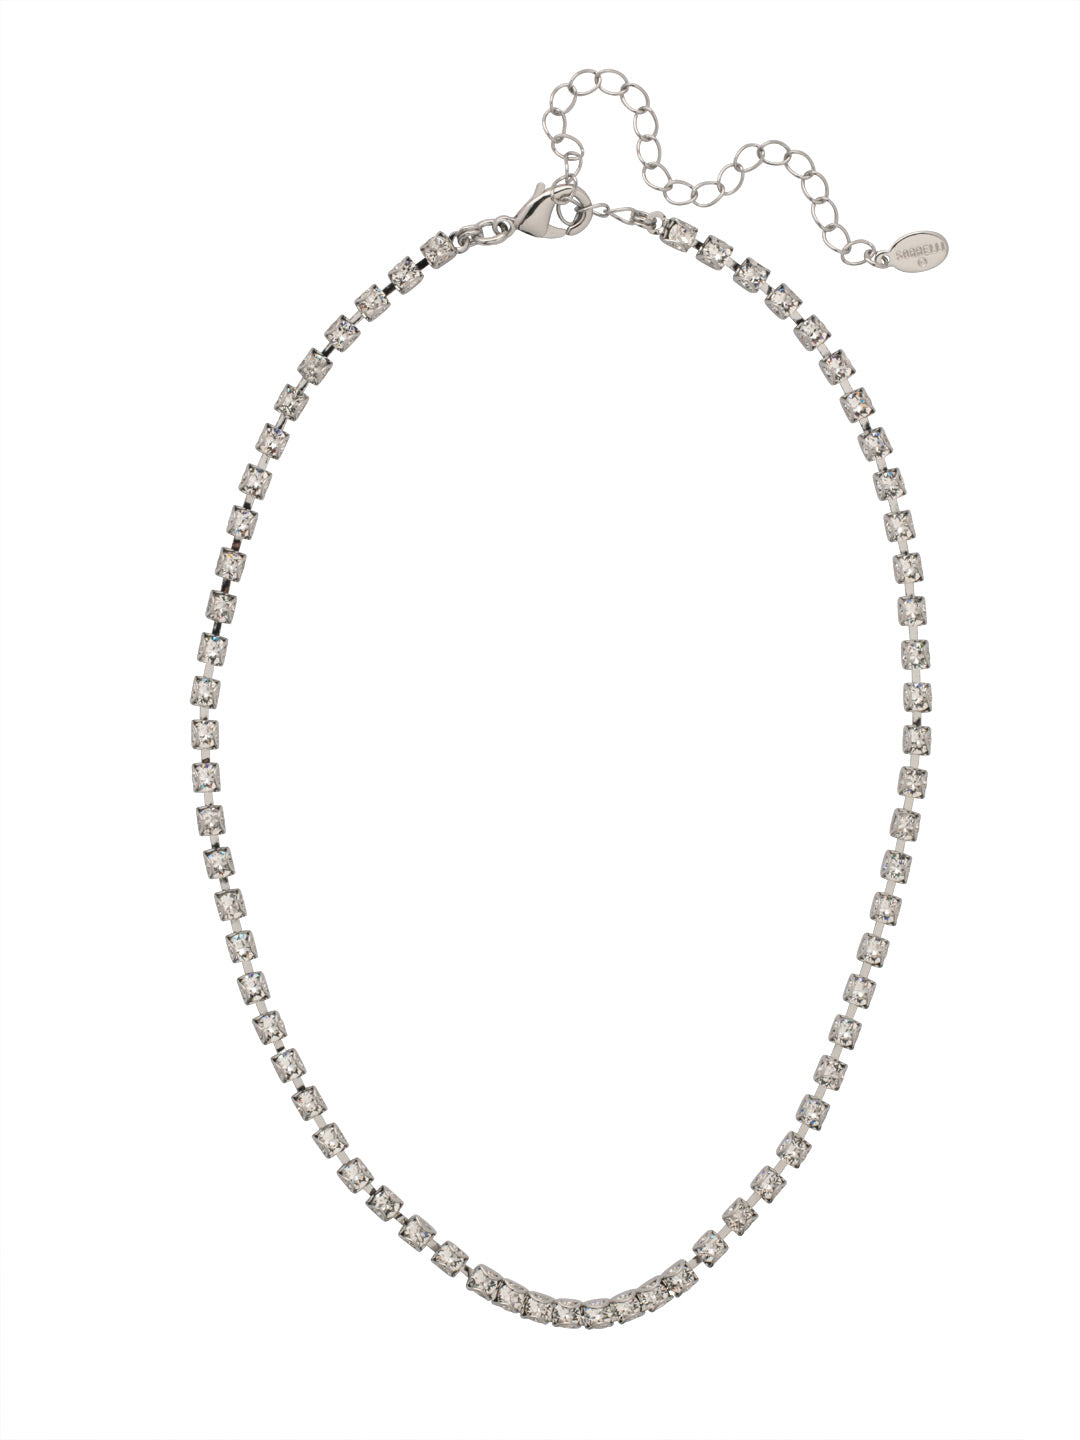 Marnie Tennis Necklace - NFA2PDCRY